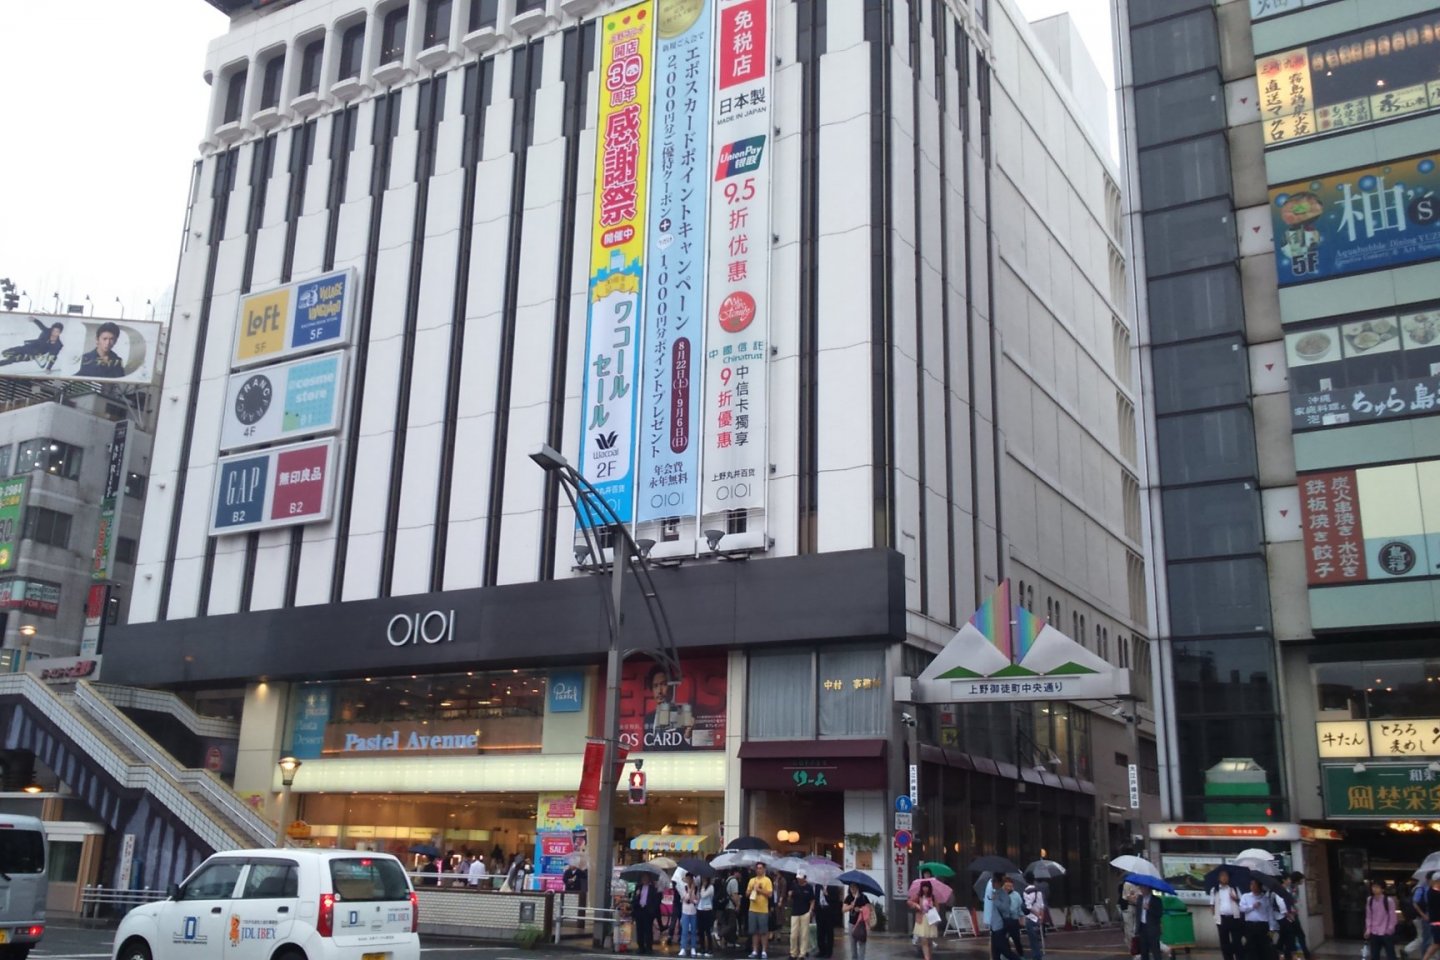 Ueno Marui is a chic complex with a wide variety of shopping and dining options